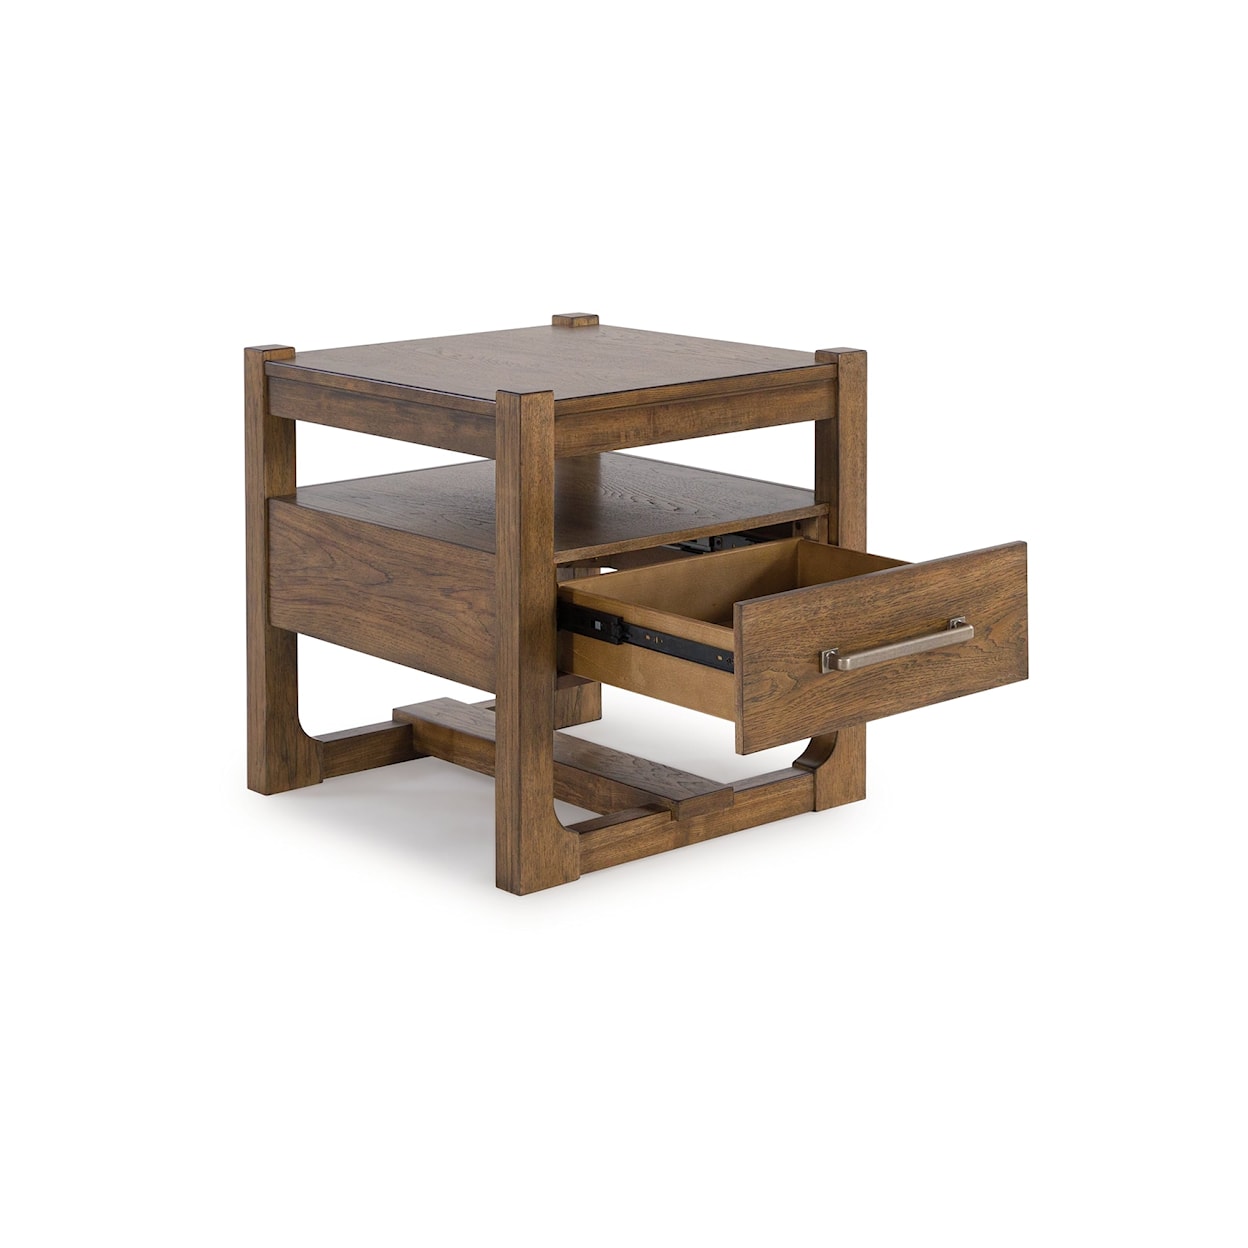 Belfort Select Mather Square End Table